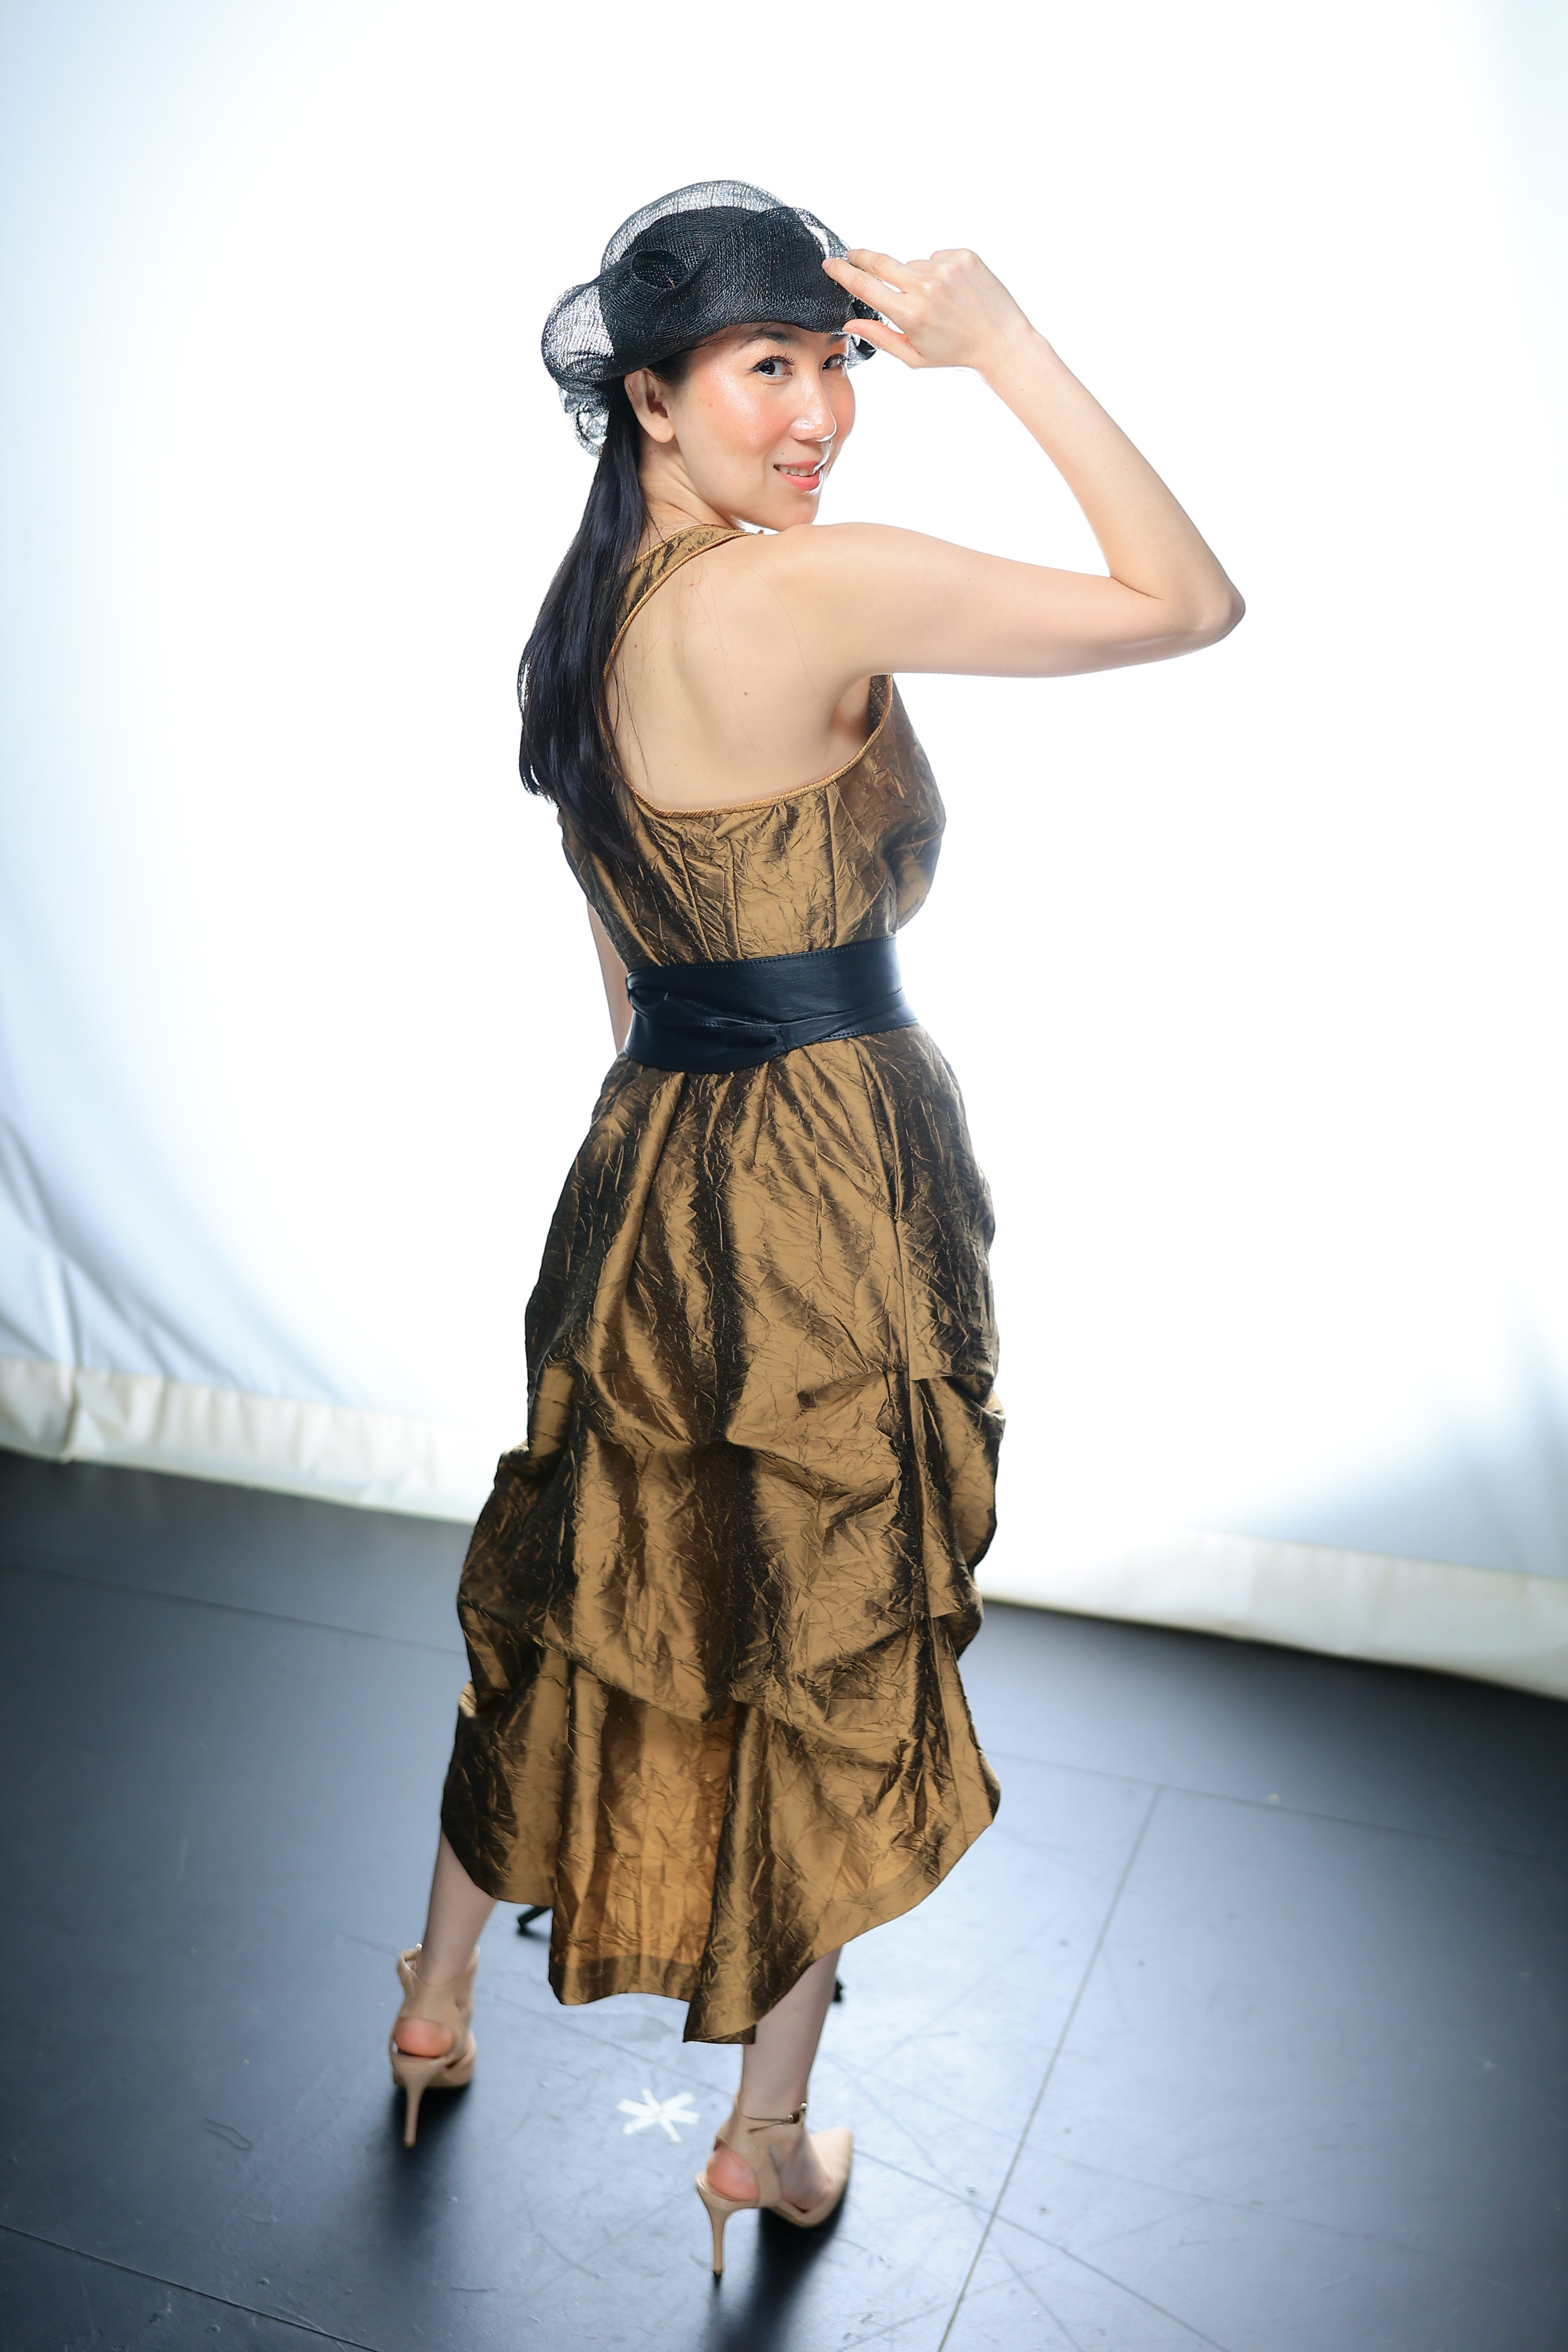 Model posed with right hand touching their black laced hat. Model is wearing beige heels and a gold and black sleeveless dress.